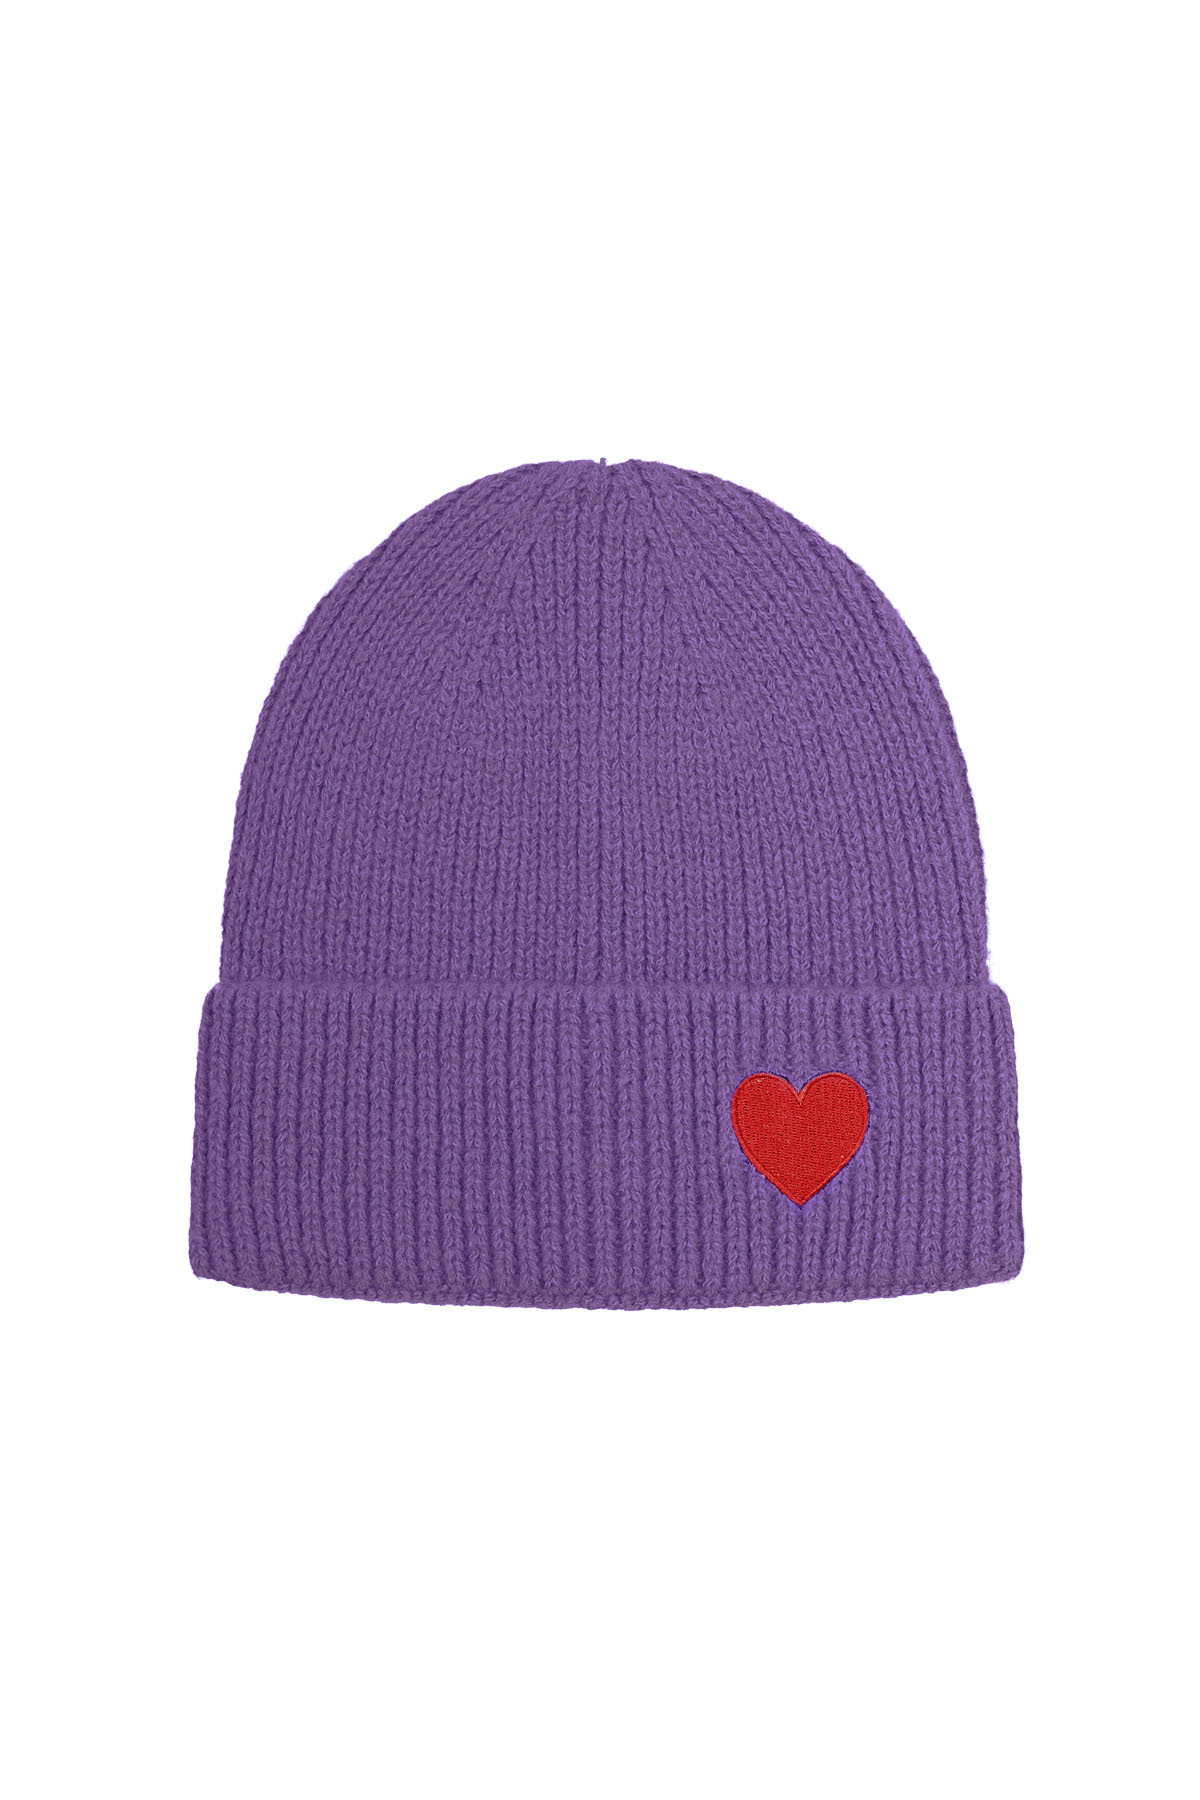 Hat with heart detail - purple h5 